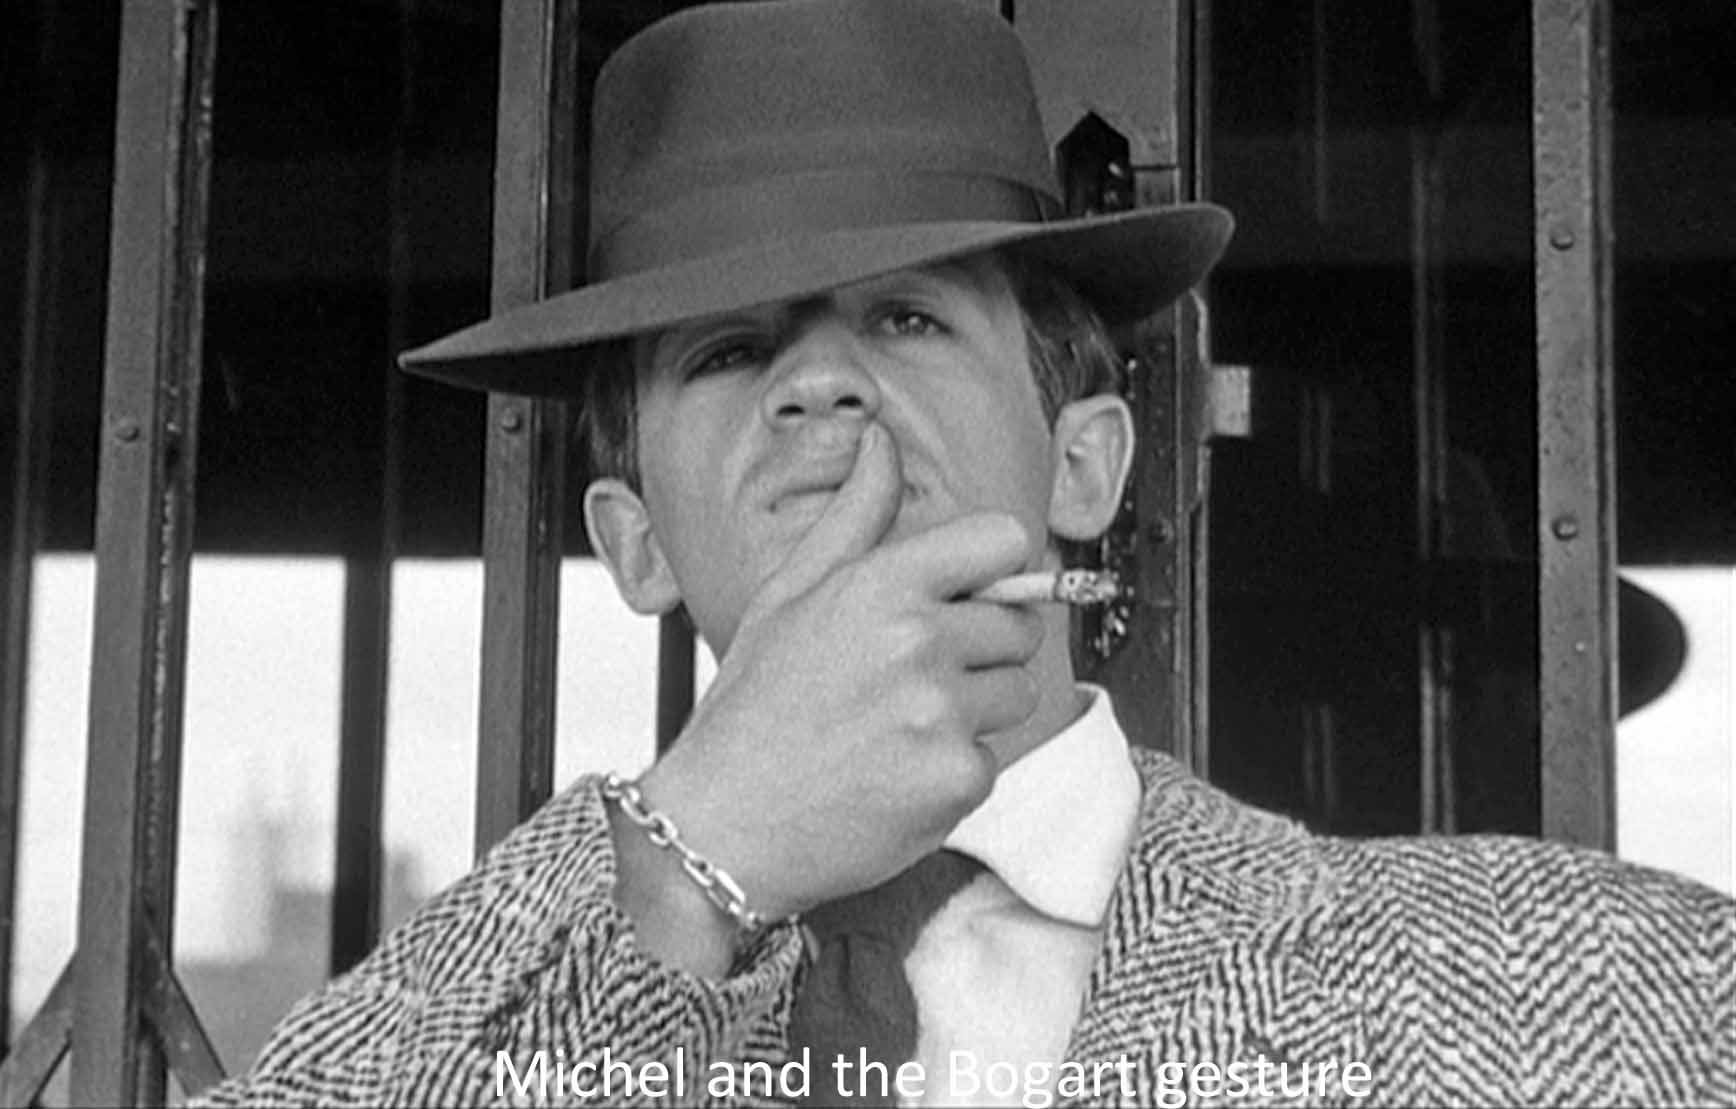 Michel and the Bogart gesture